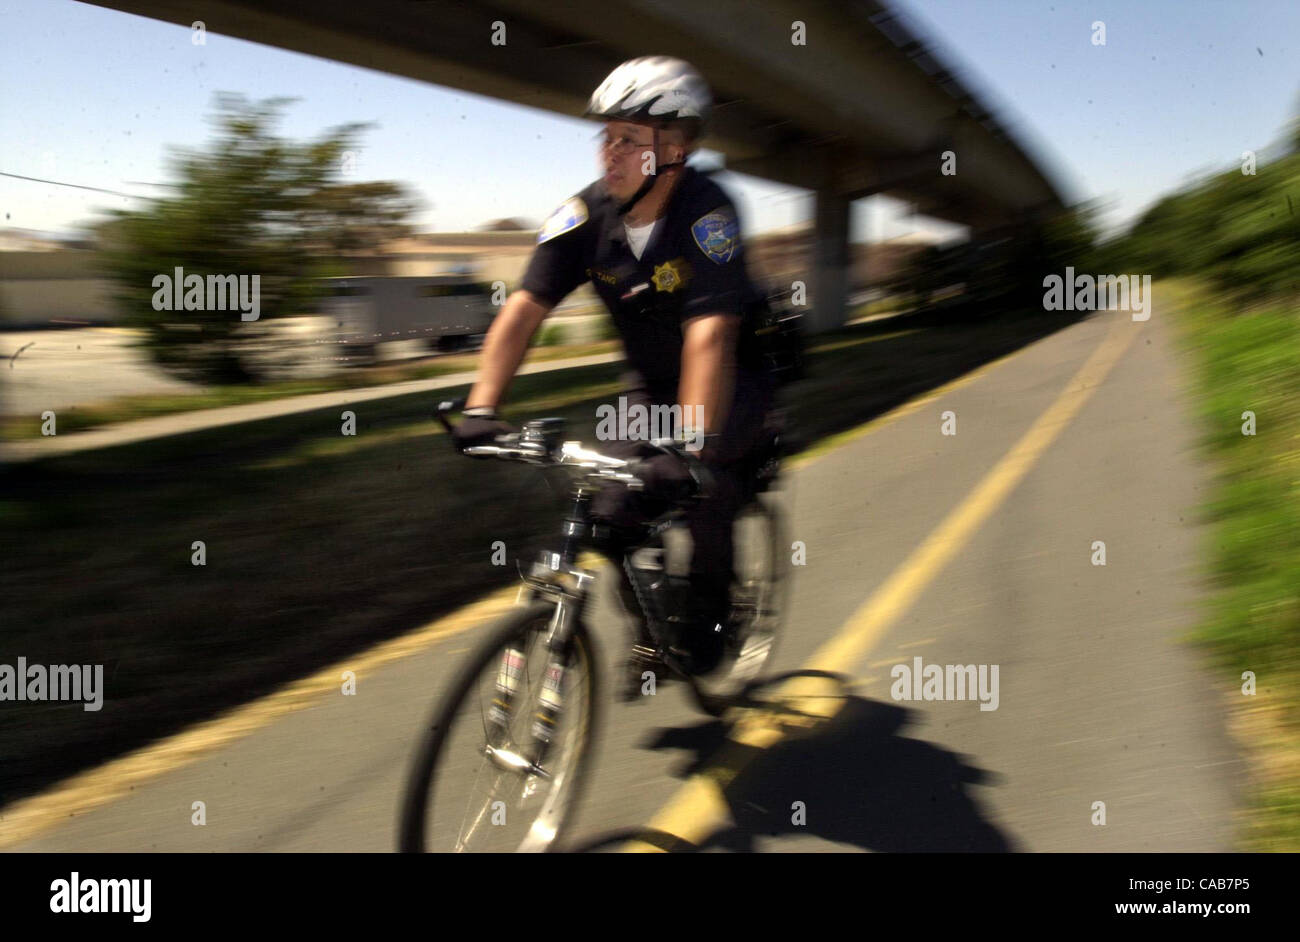 On a Mongoose mountain bike El Cerrito police officer Gilbert Tang (cq)patrols a stretch of trail under the BART tracks near El Cerrito Plaza in El Cerrito, Calif. on Wednesday, May 12, 2004. Tang rides the trail 3-4 times per week. (Contra Costa Times/Sherry LaVars) Stock Photo